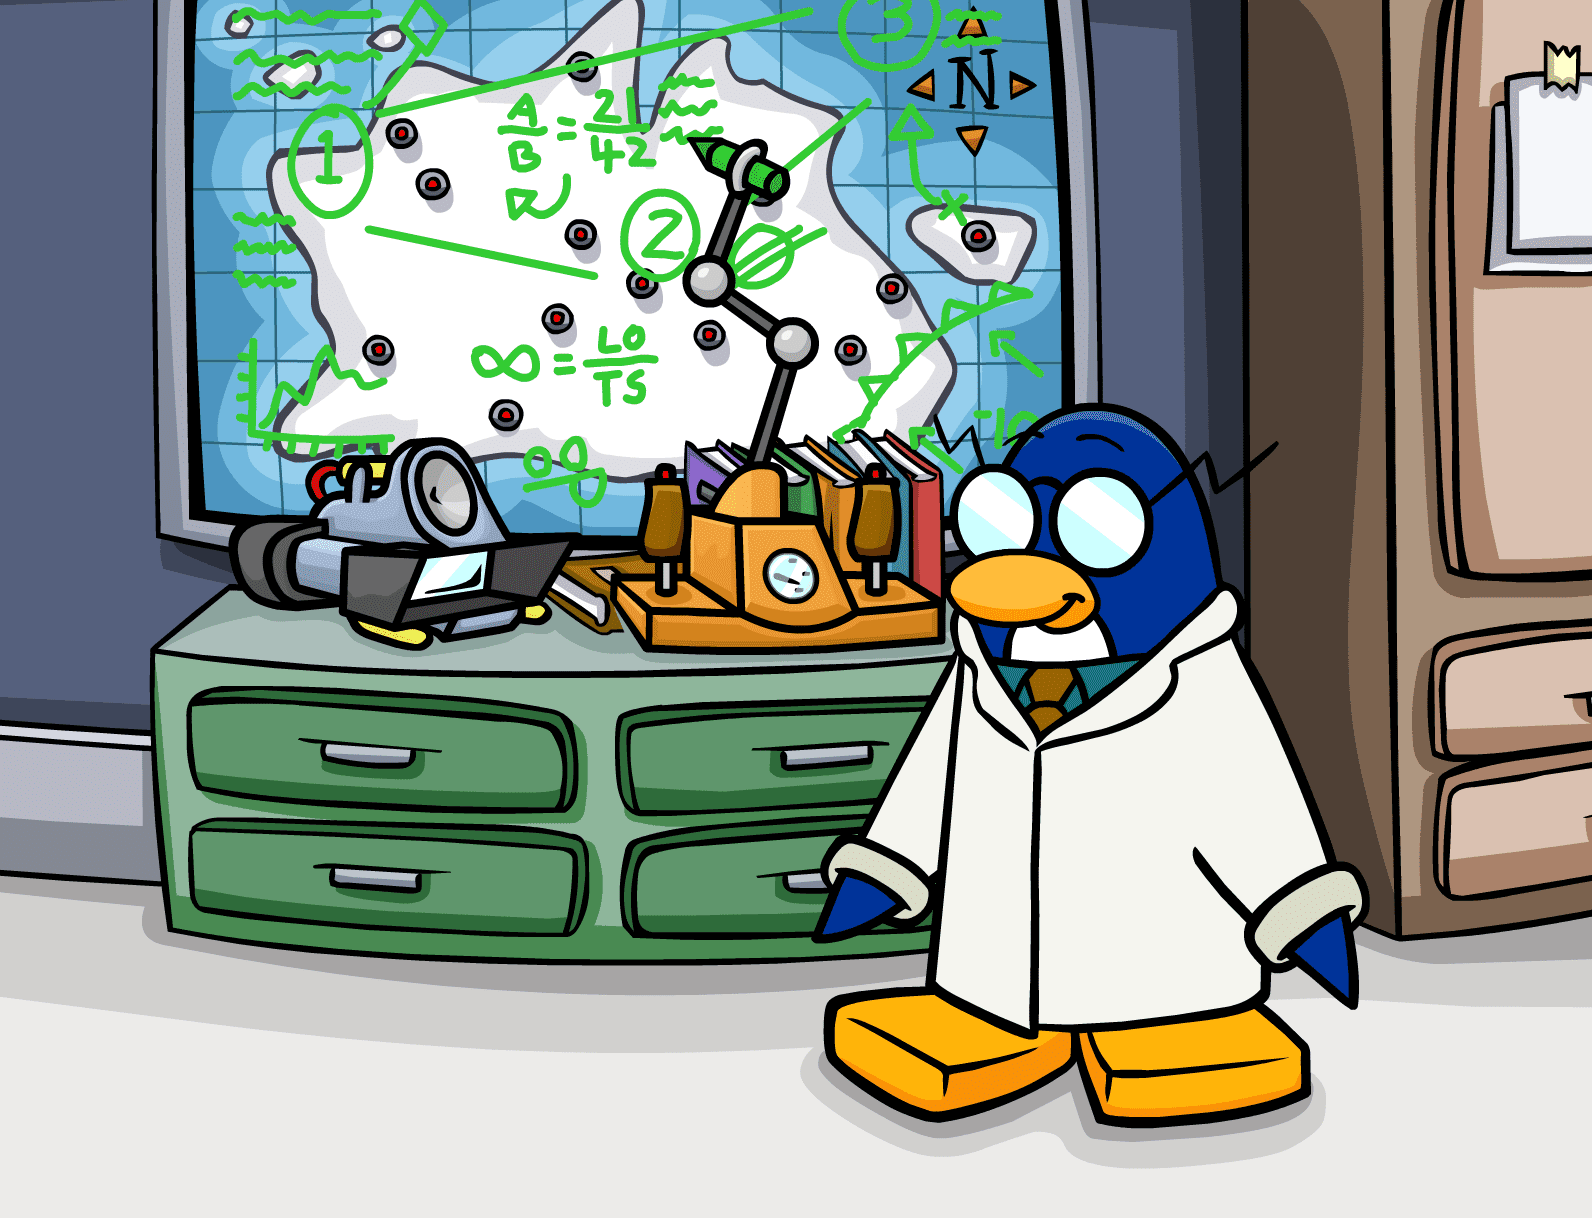 does-anyone-else-remember-those-club-penguin-spy-missions